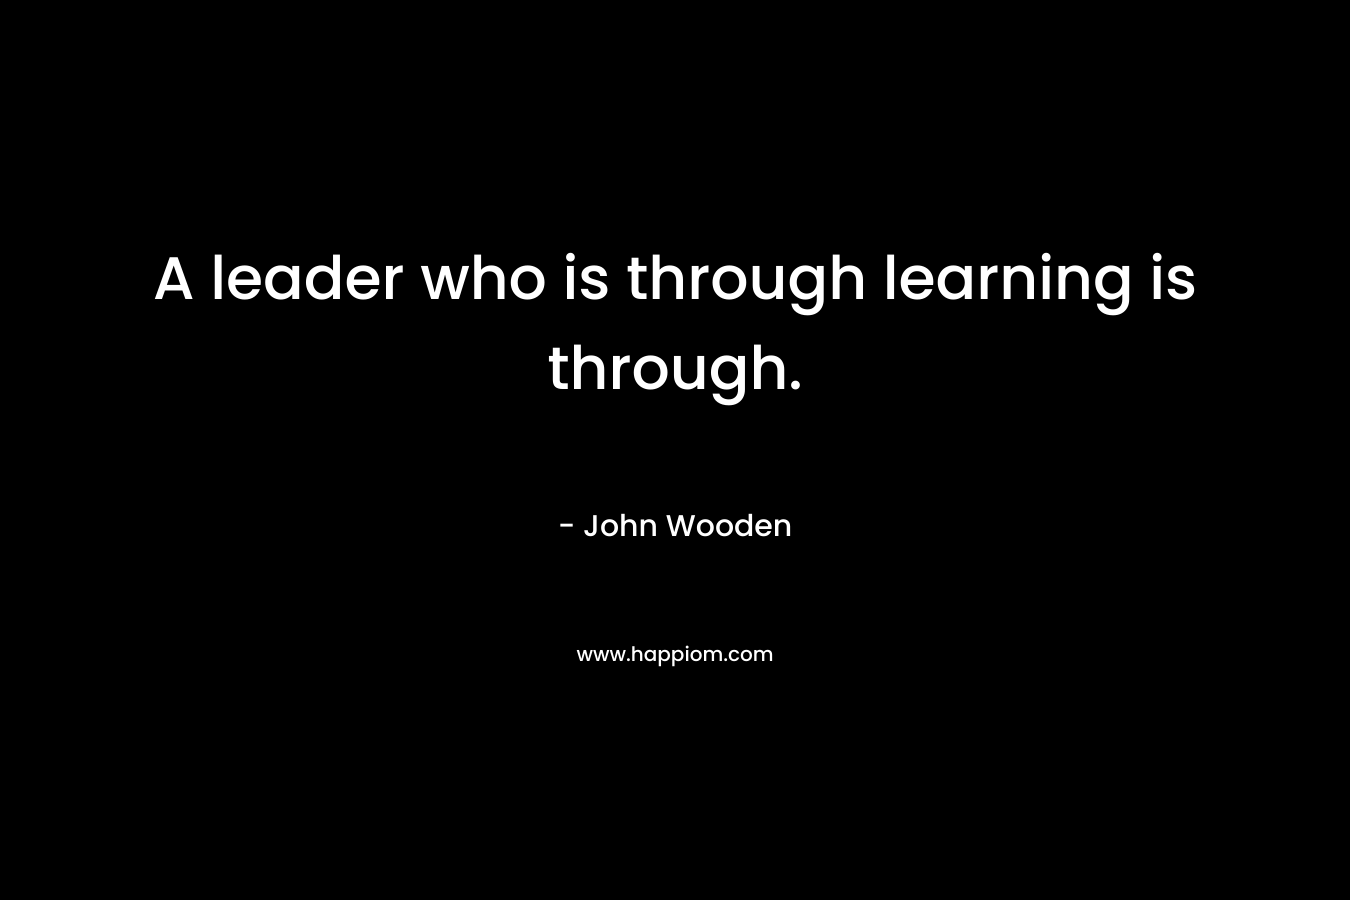 A leader who is through learning is through. – John Wooden